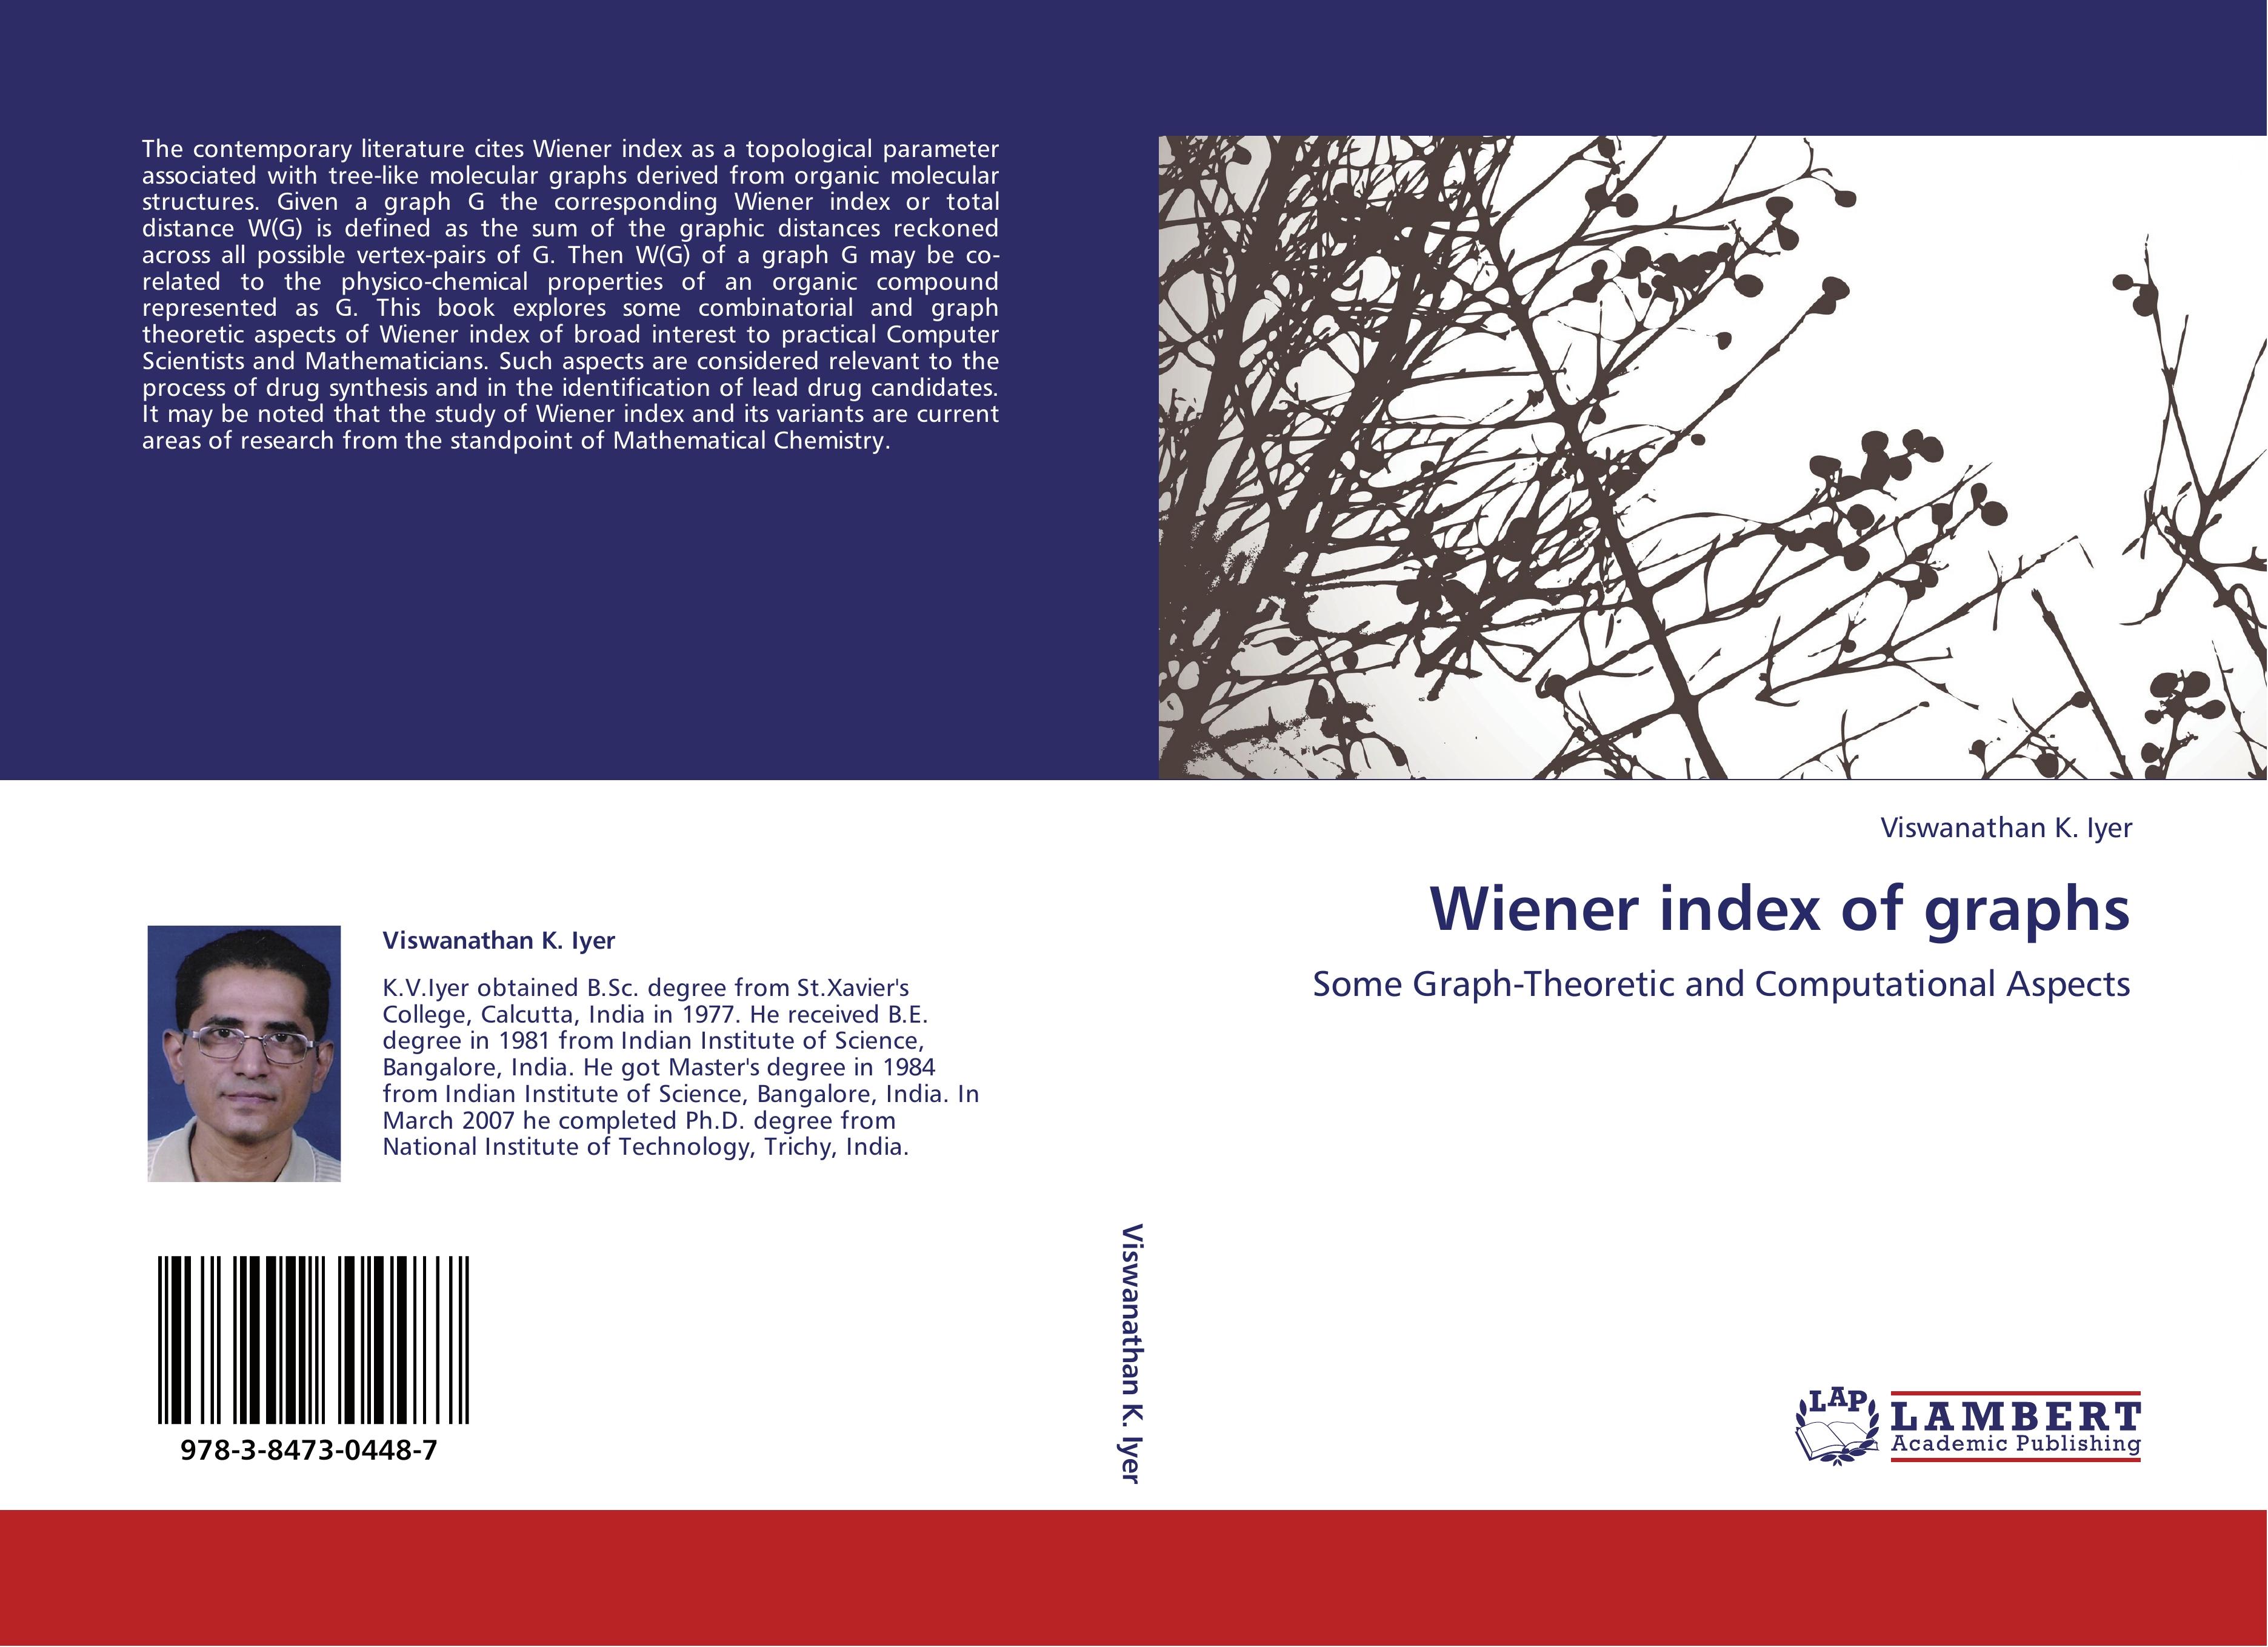 Wiener index of graphs / Some Graph-Theoretic and Computational Aspects / Viswanathan K. Iyer / Taschenbuch / Paperback / 96 S. / Englisch / 2012 / LAP LAMBERT Academic Publishing / EAN 9783847304487 - Iyer, Viswanathan K.